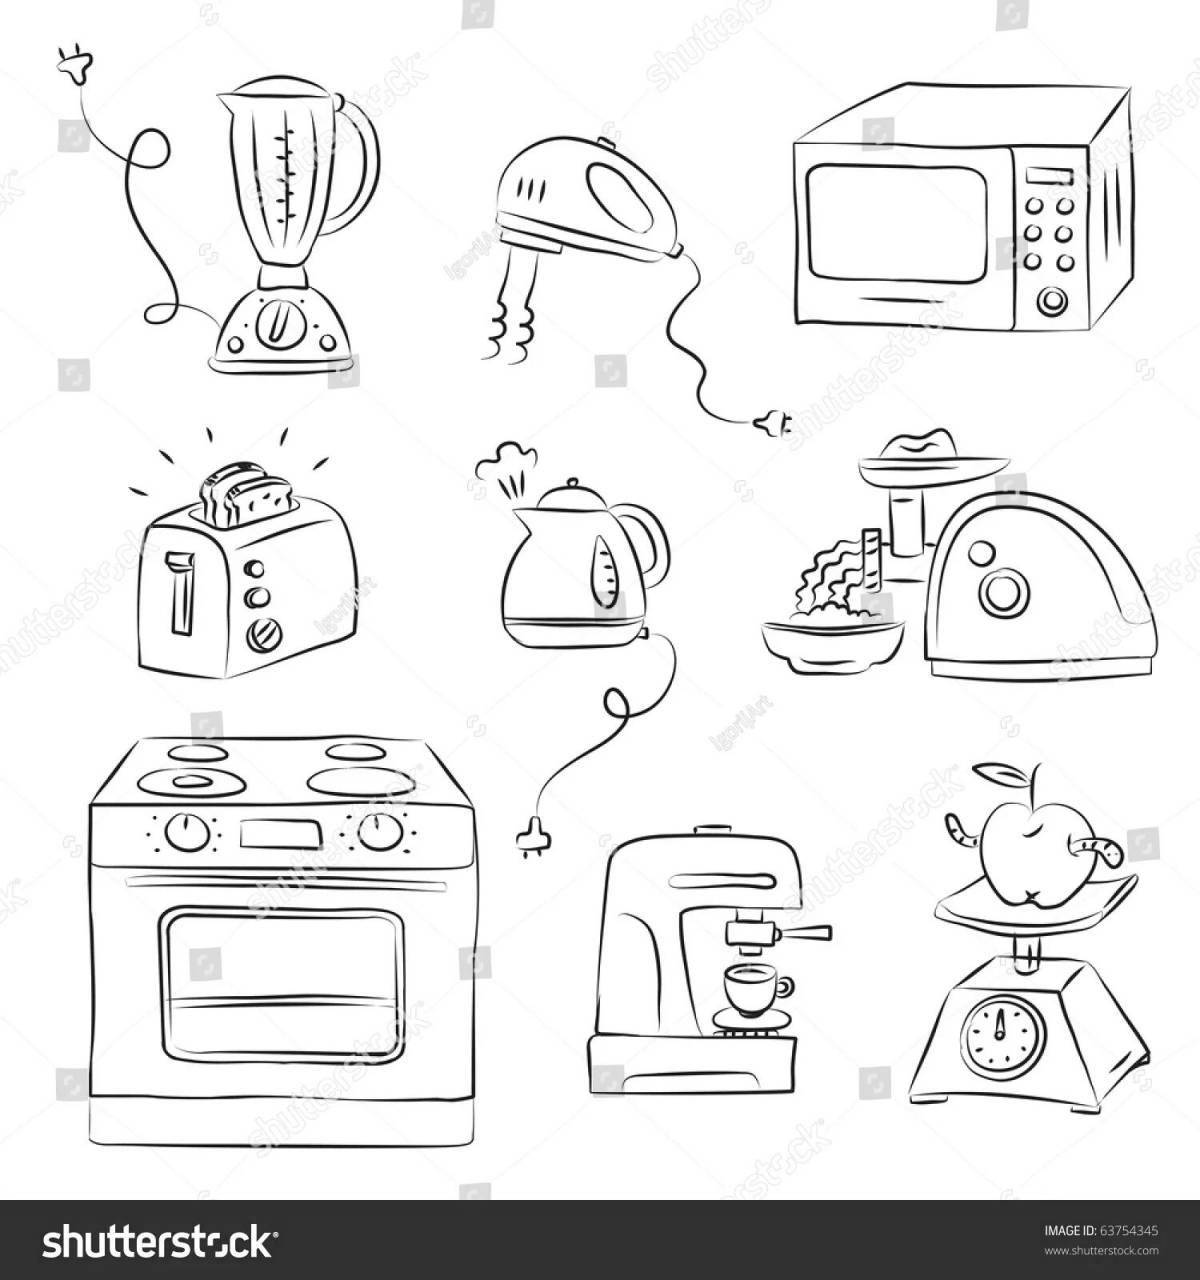 Intriguing coloring of household appliances